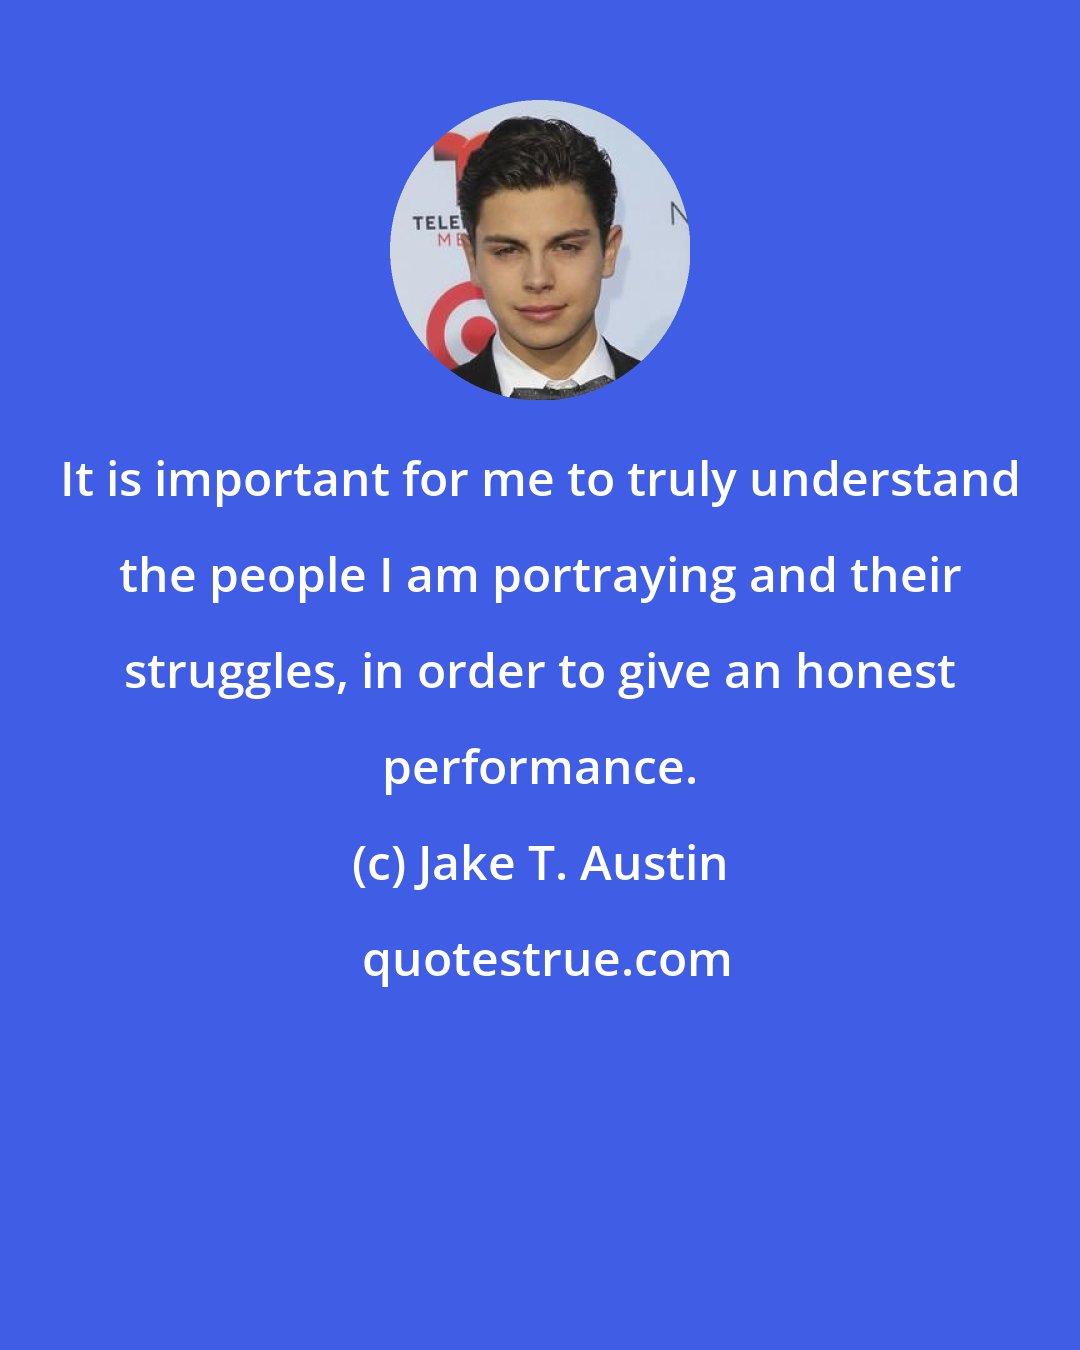 Jake T. Austin: It is important for me to truly understand the people I am portraying and their struggles, in order to give an honest performance.